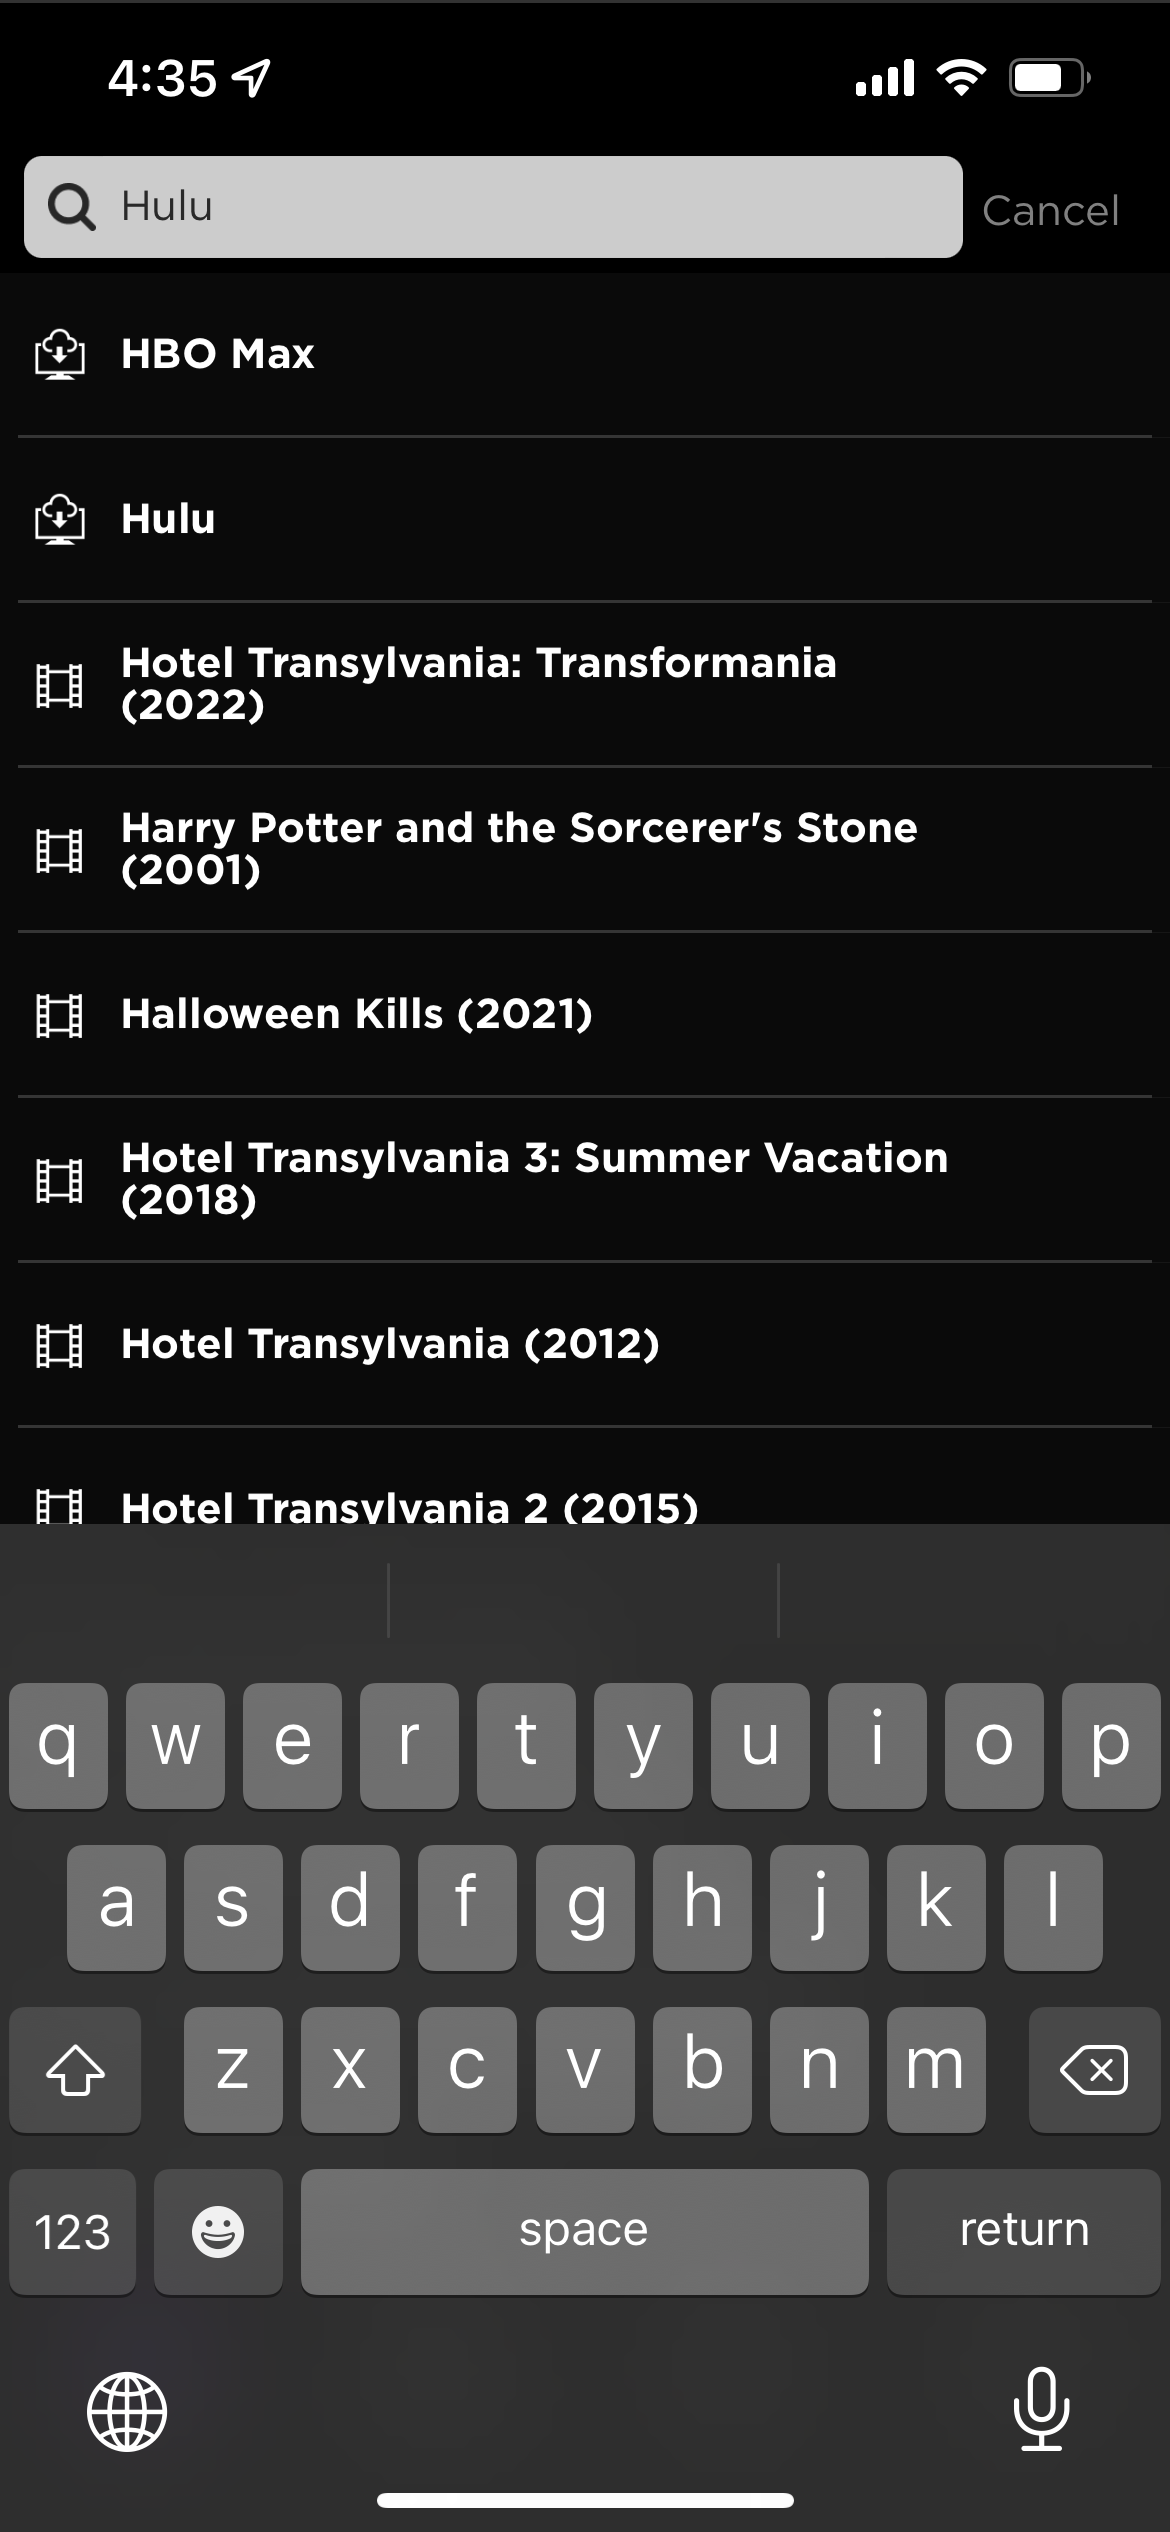 Searching for Hulu in the Roku mobile app